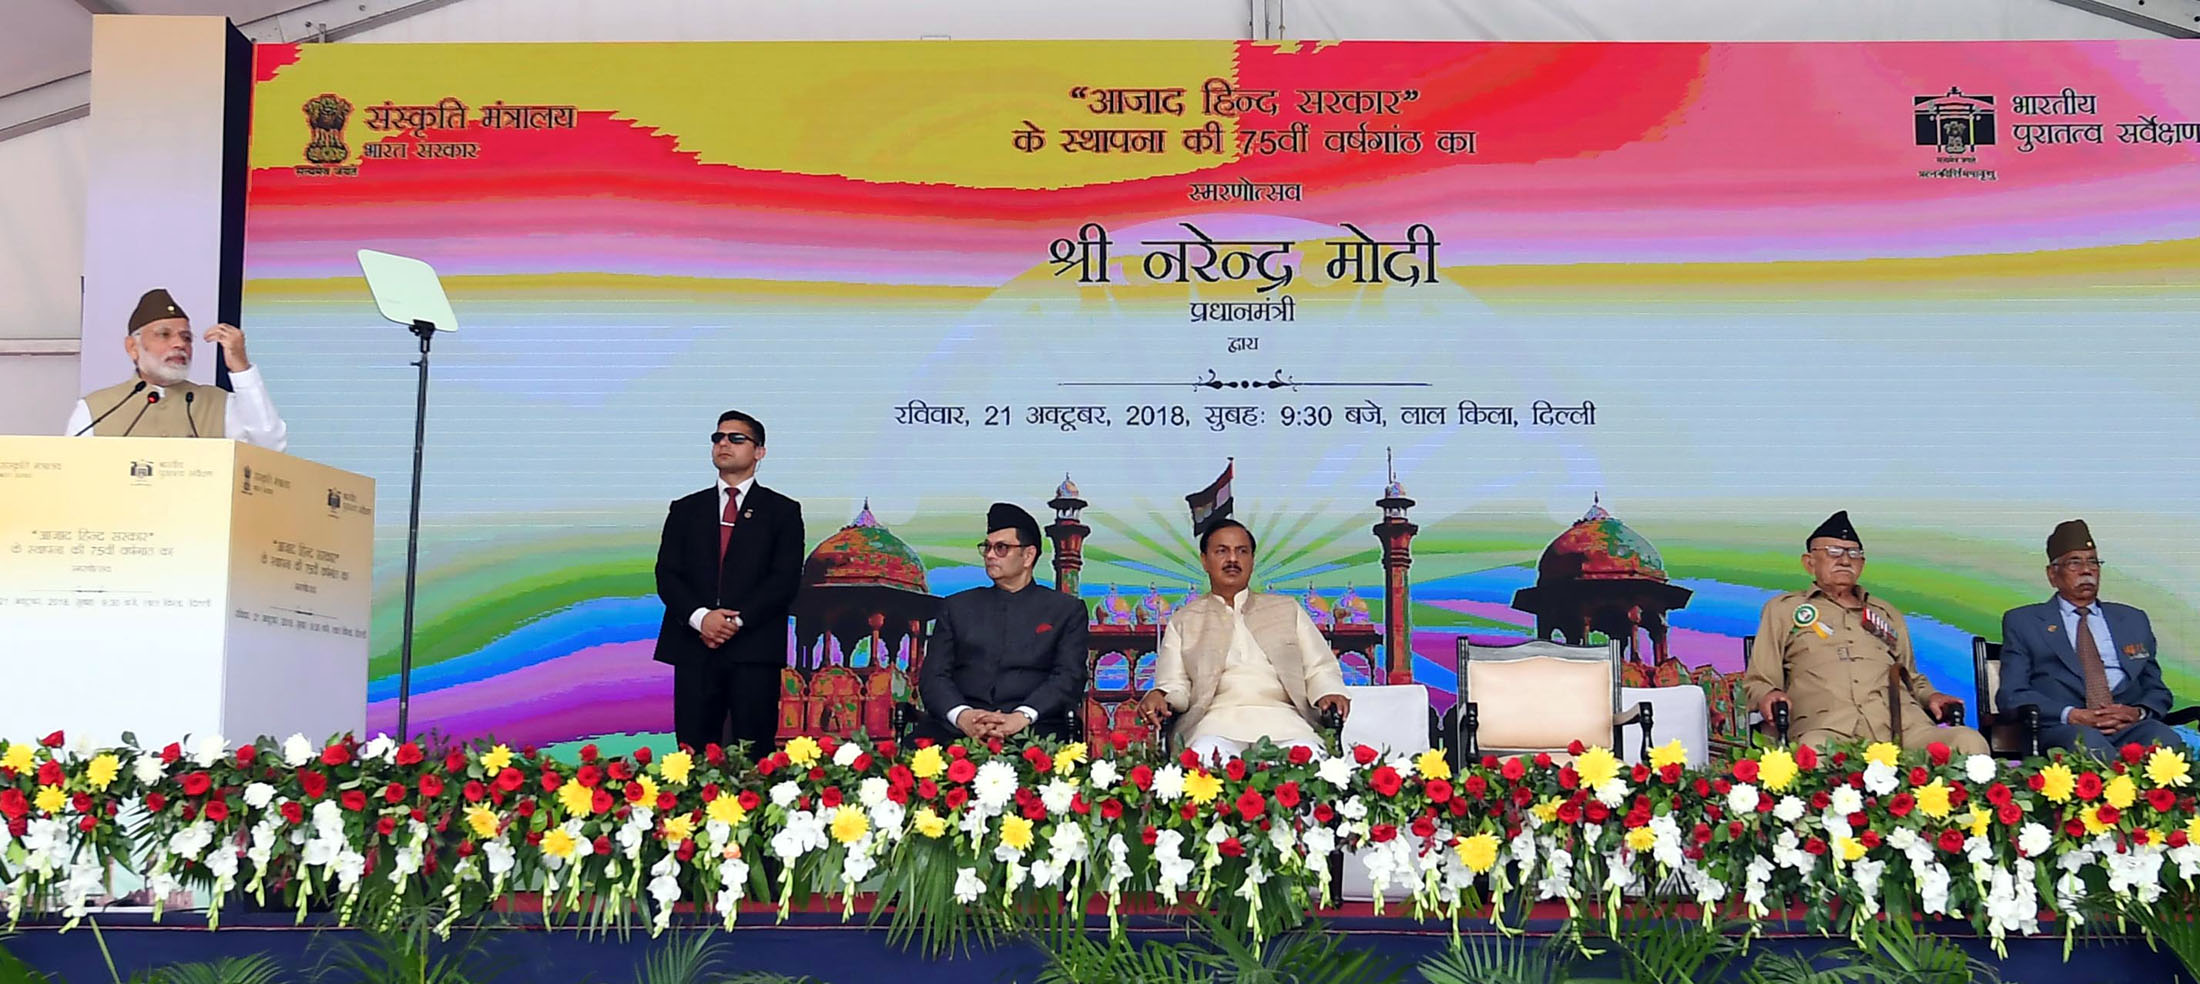 The Prime Minister, Shri Narendra Modi addressing the gathering at a function to commemorate the 75th anniversary formation of the Azad Hind Government, at Red Fort, Delhi on October 21, 2018. The Minister of State for Culture (I/C) and Environment, Forest & Climate Change, Dr. Mahesh Sharma and other dignitaries are also seen.